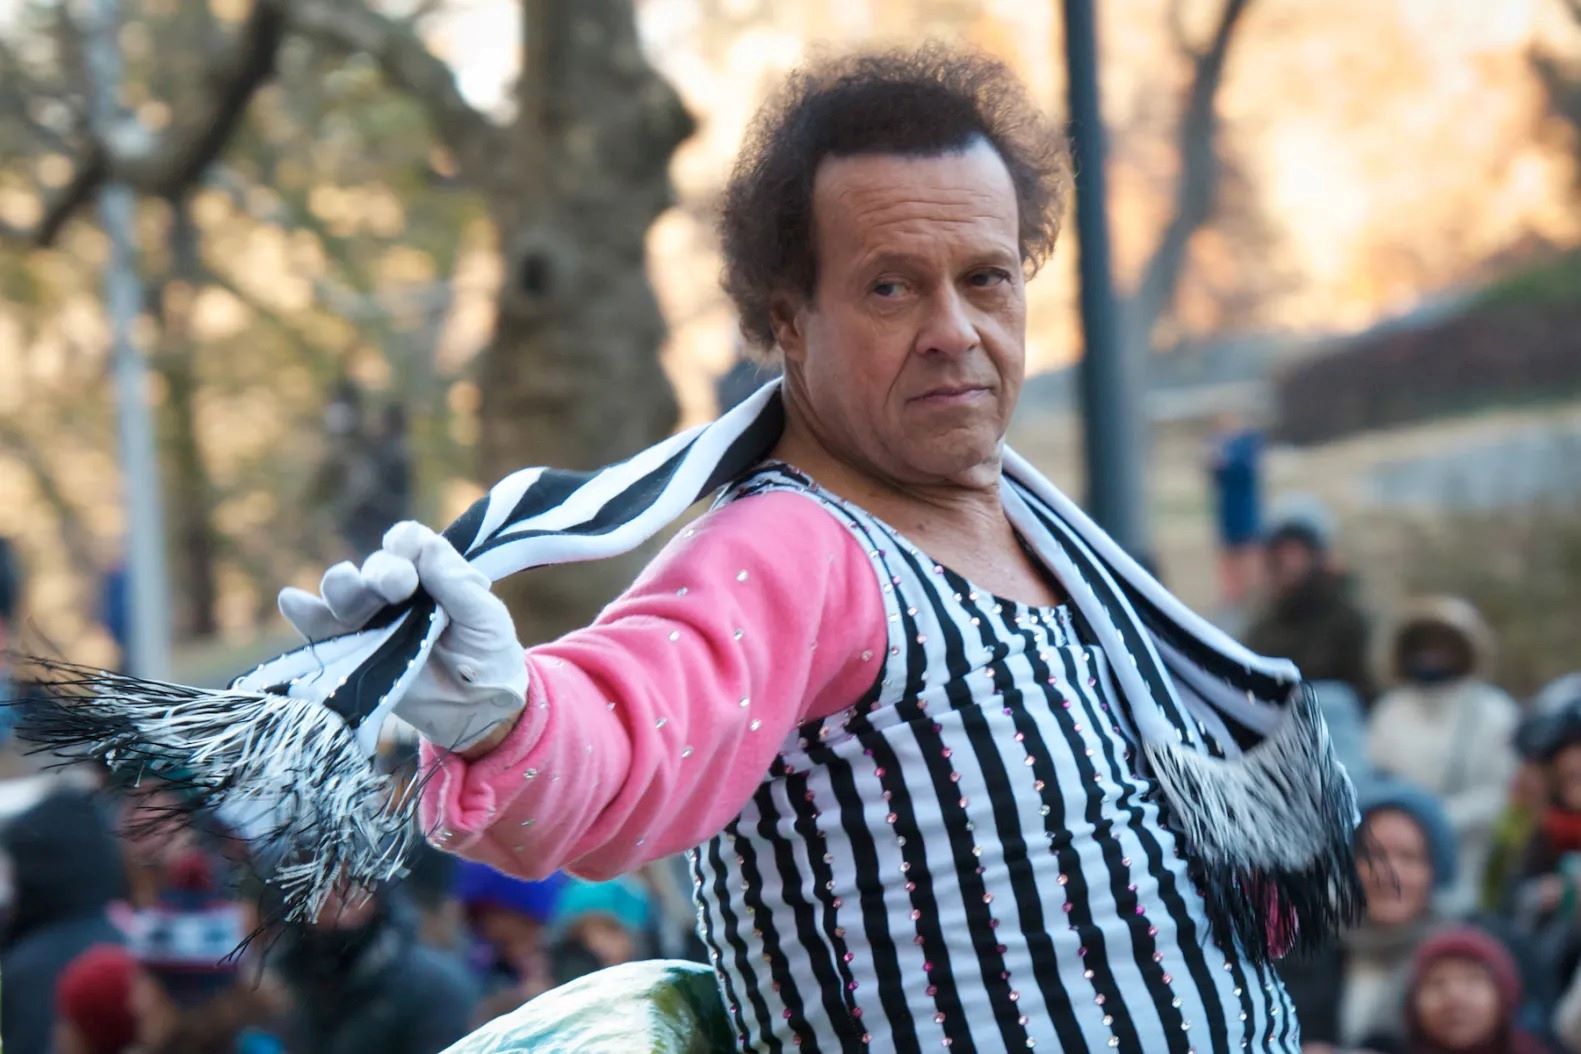 richard-simmons-speaks-out-against-unauthorized-biopic-starring-pauly-shore